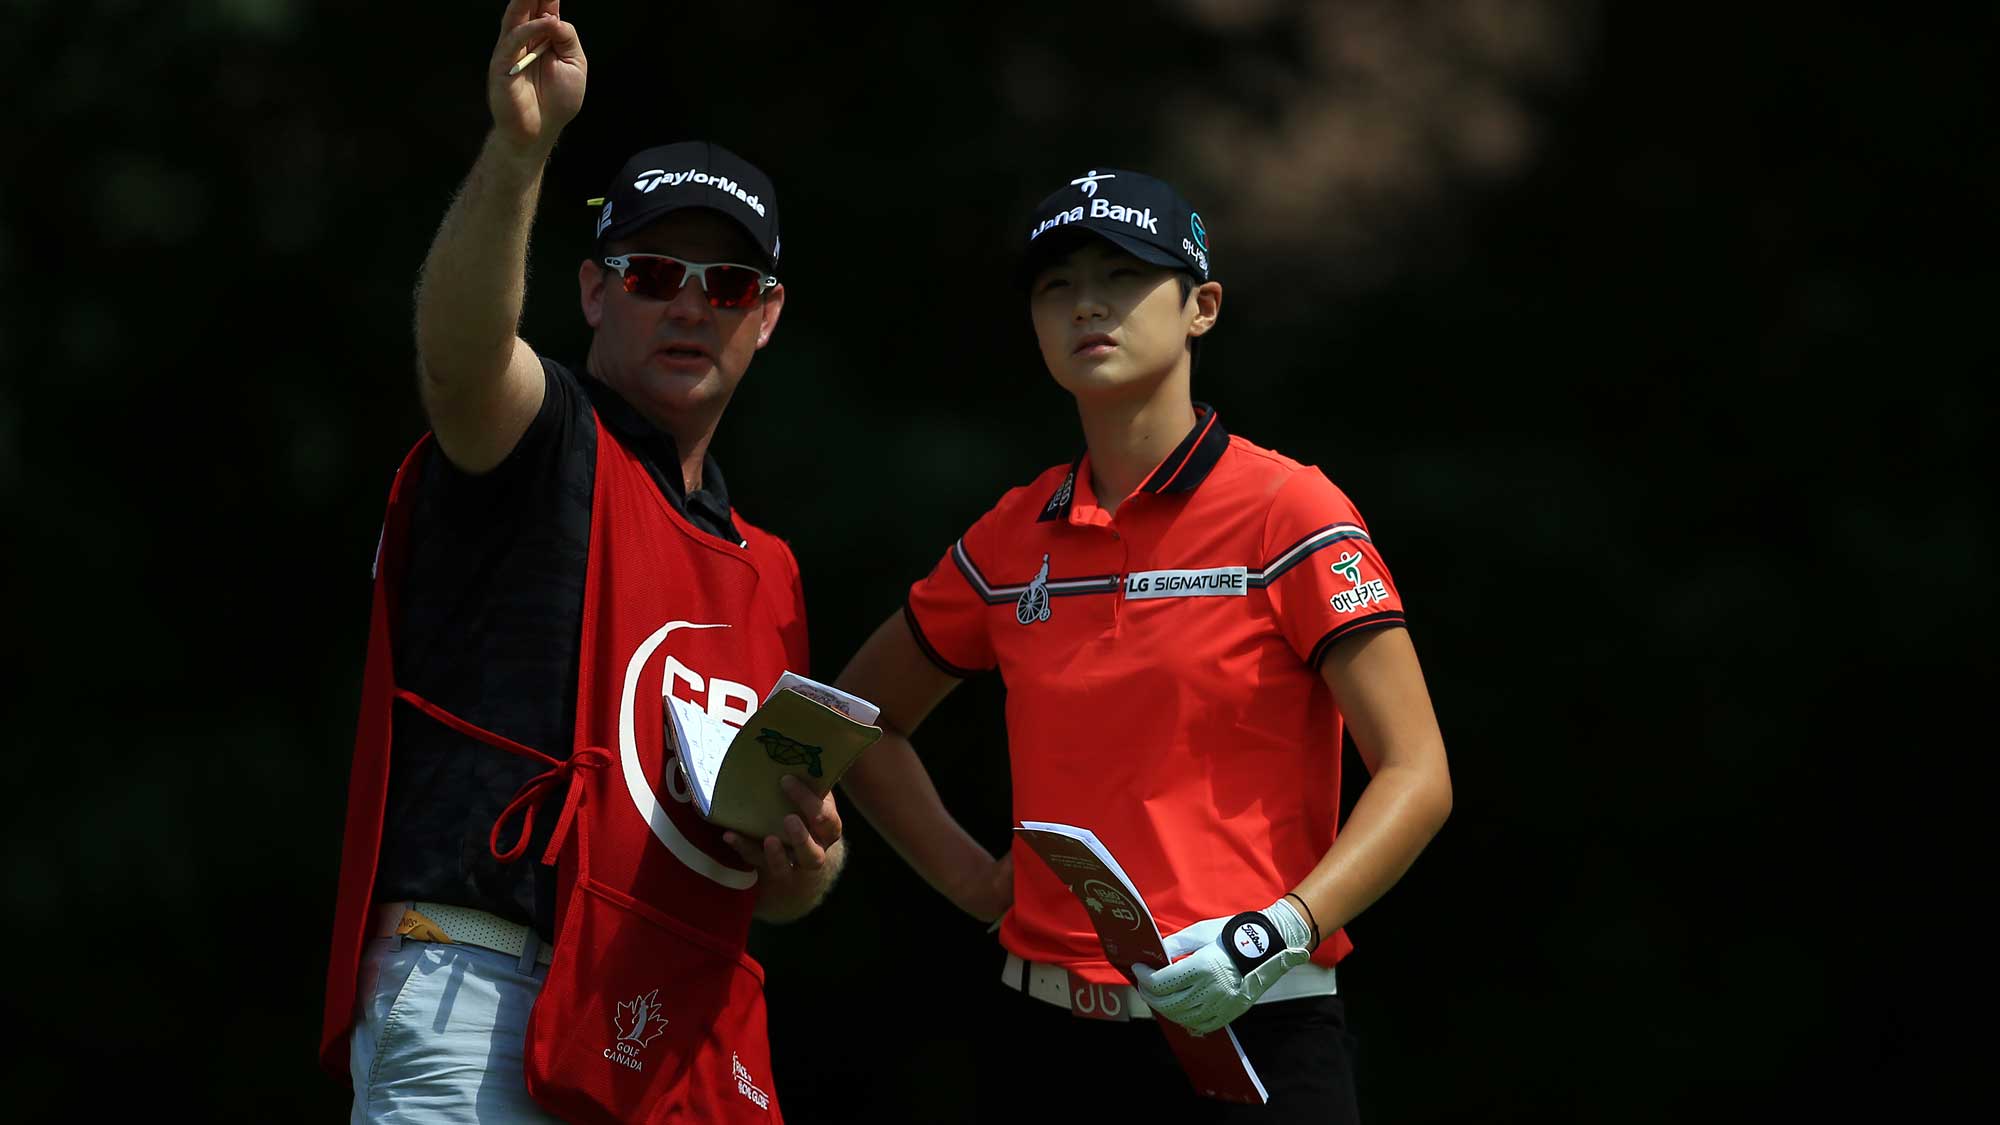 Sung Hyun Park of Korea prepares to hit her tee shot on the 4th hole during the final round of the Canadian Pacific Women's Open